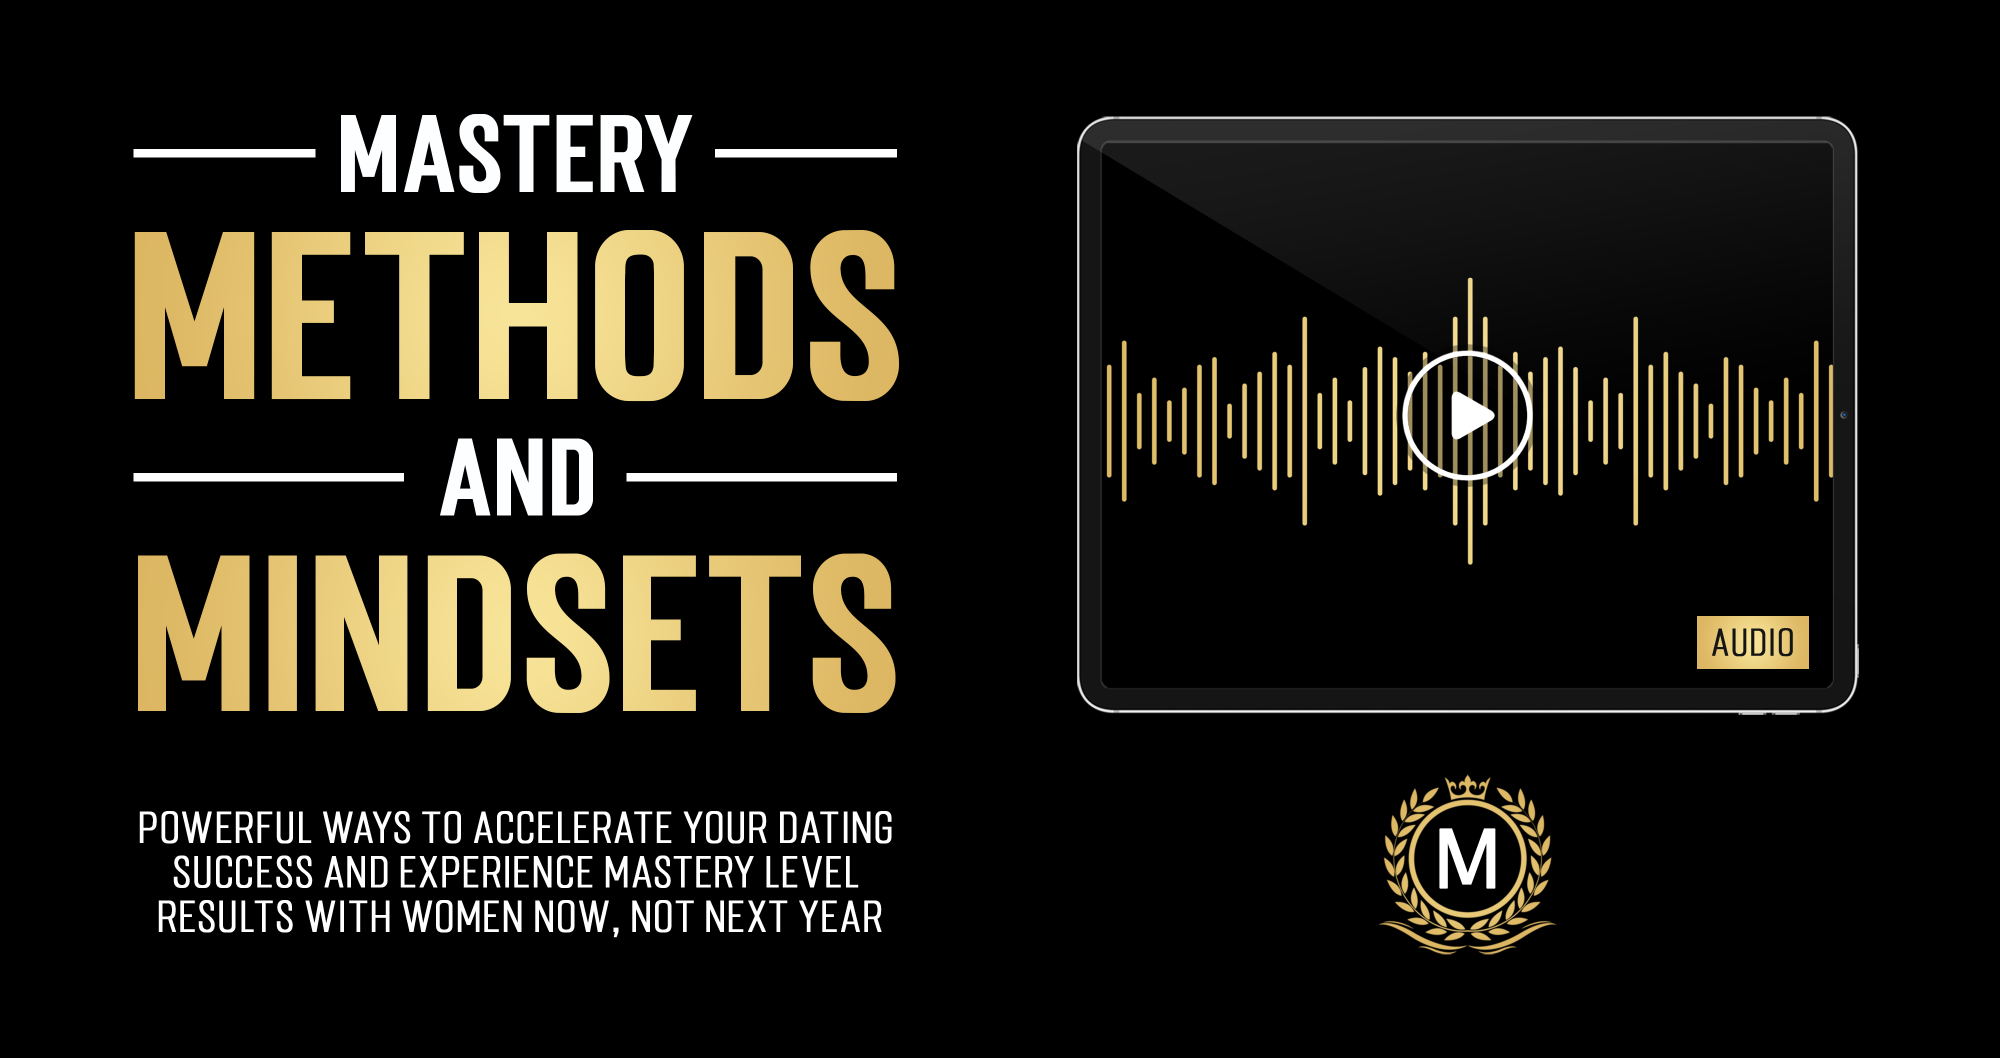 Mastery Methods and Mindsets by The Modern Man